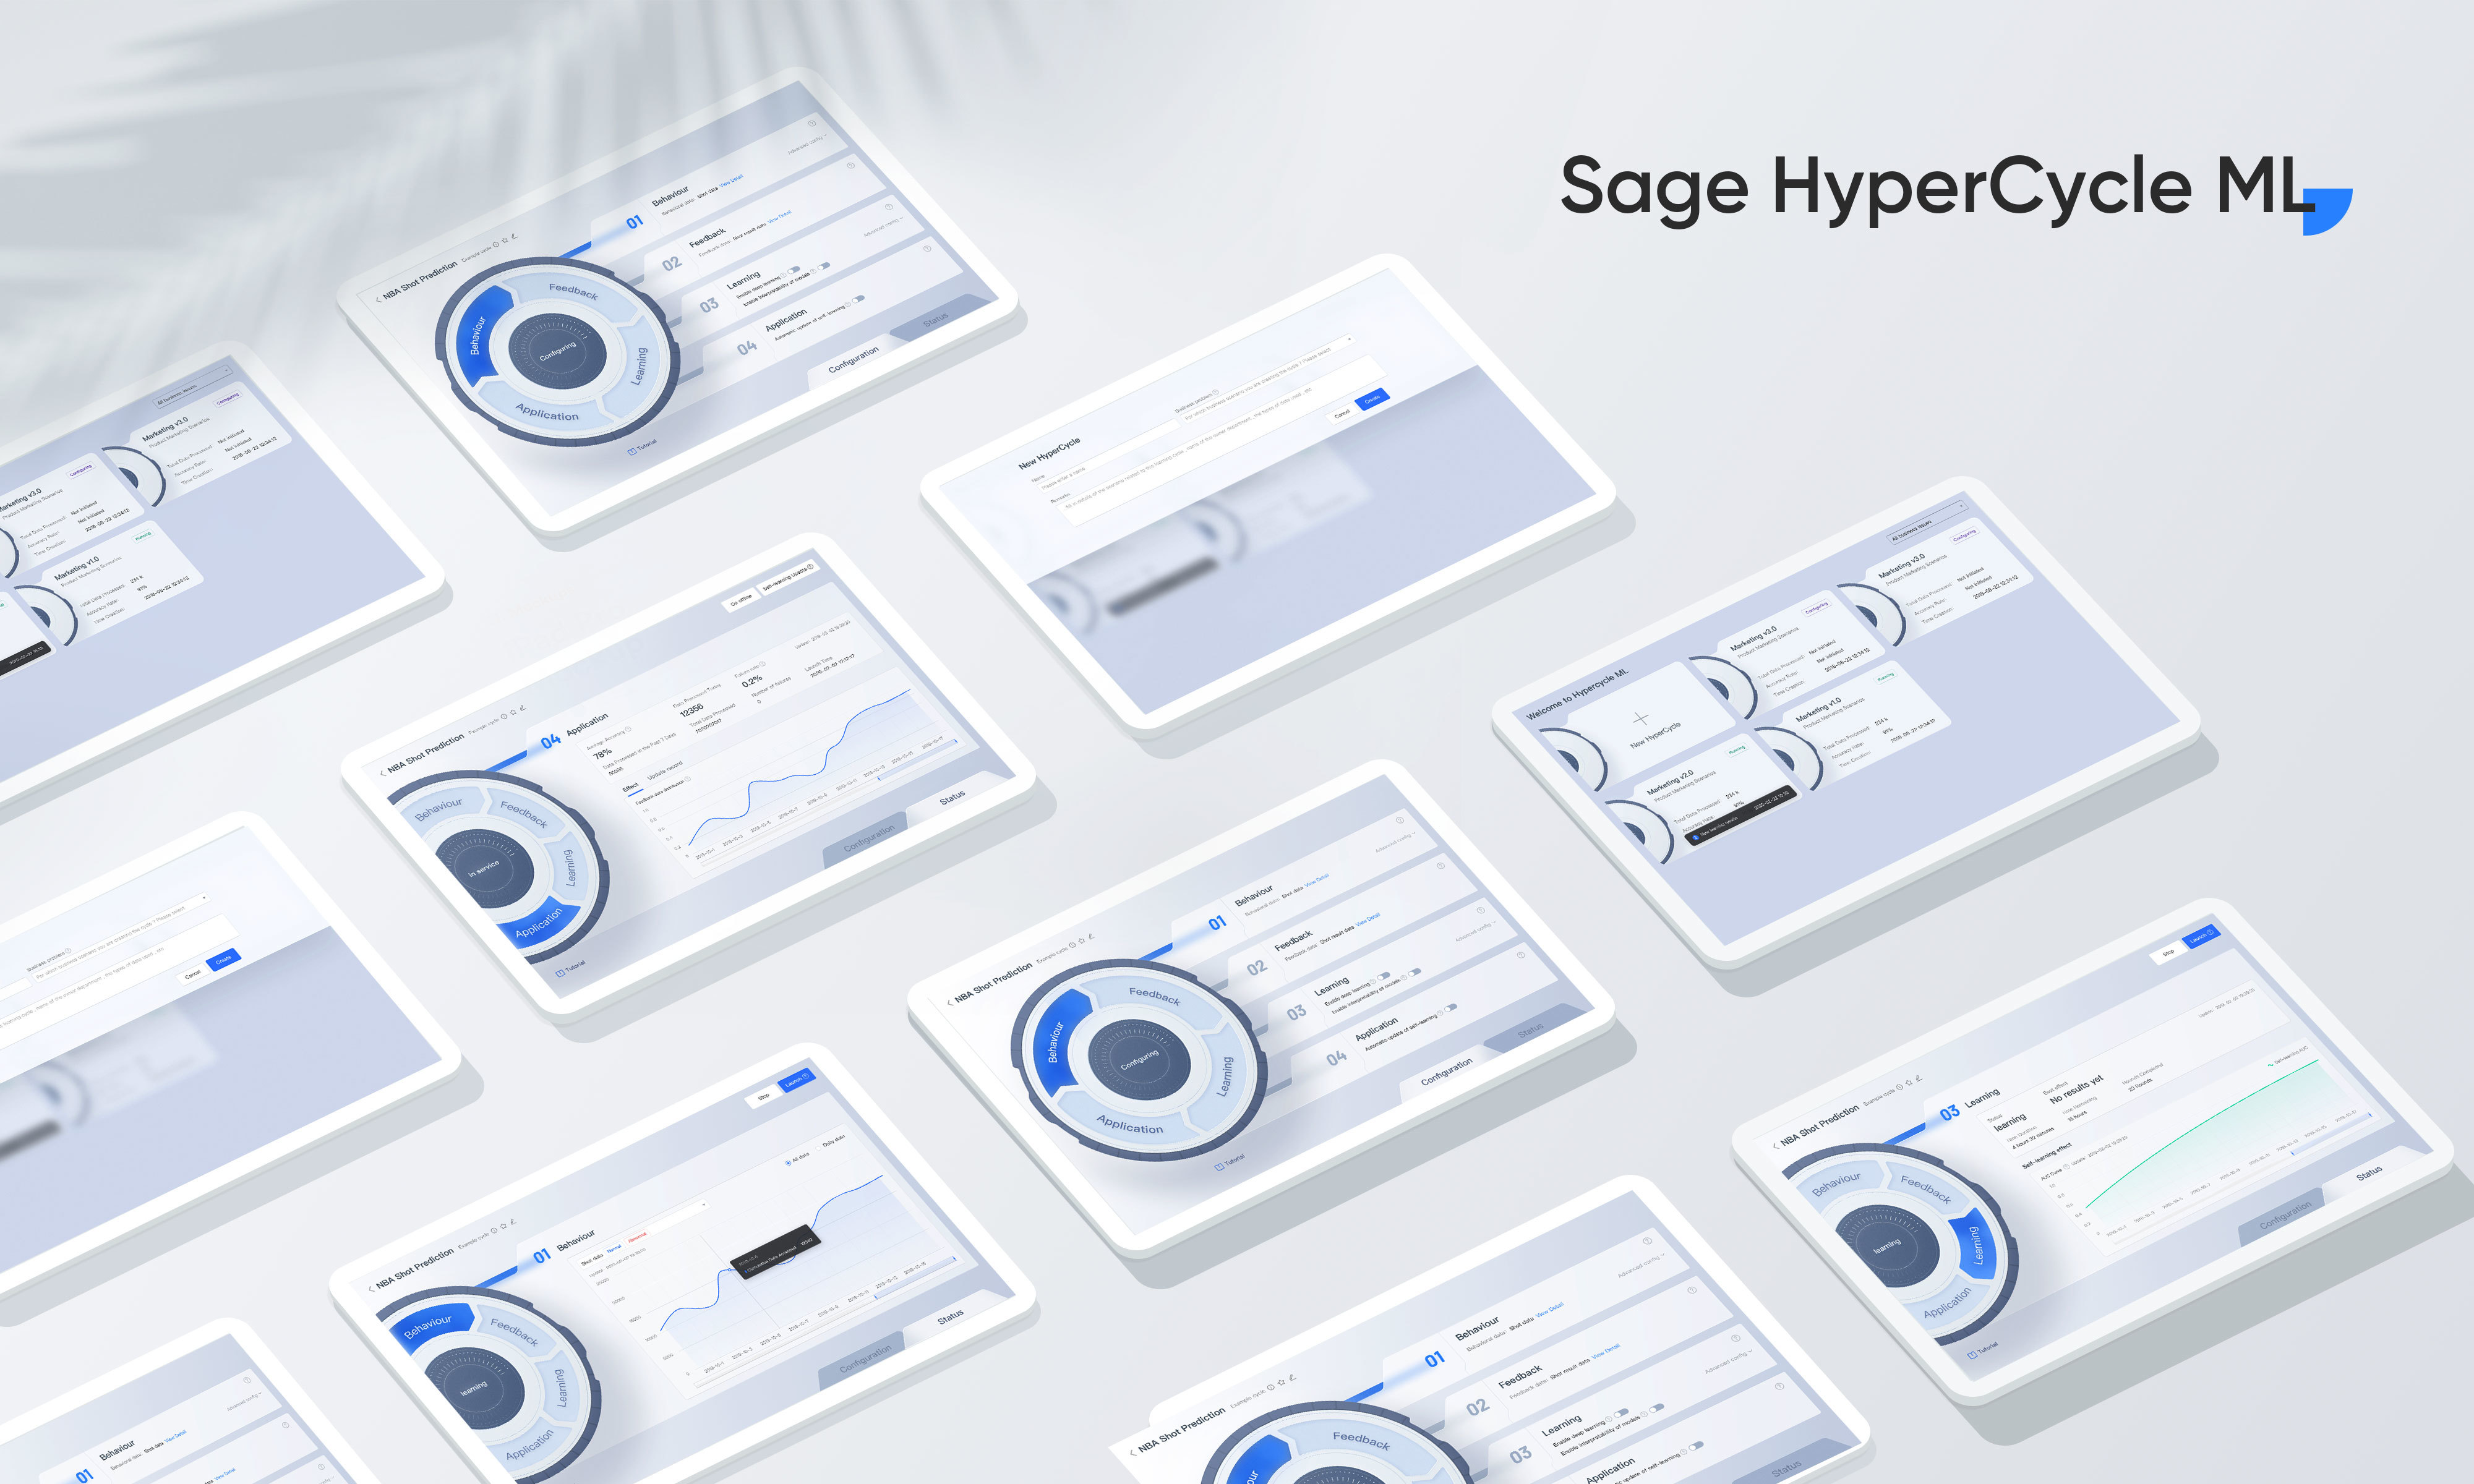 Sage HyperCycle ML Interface Design